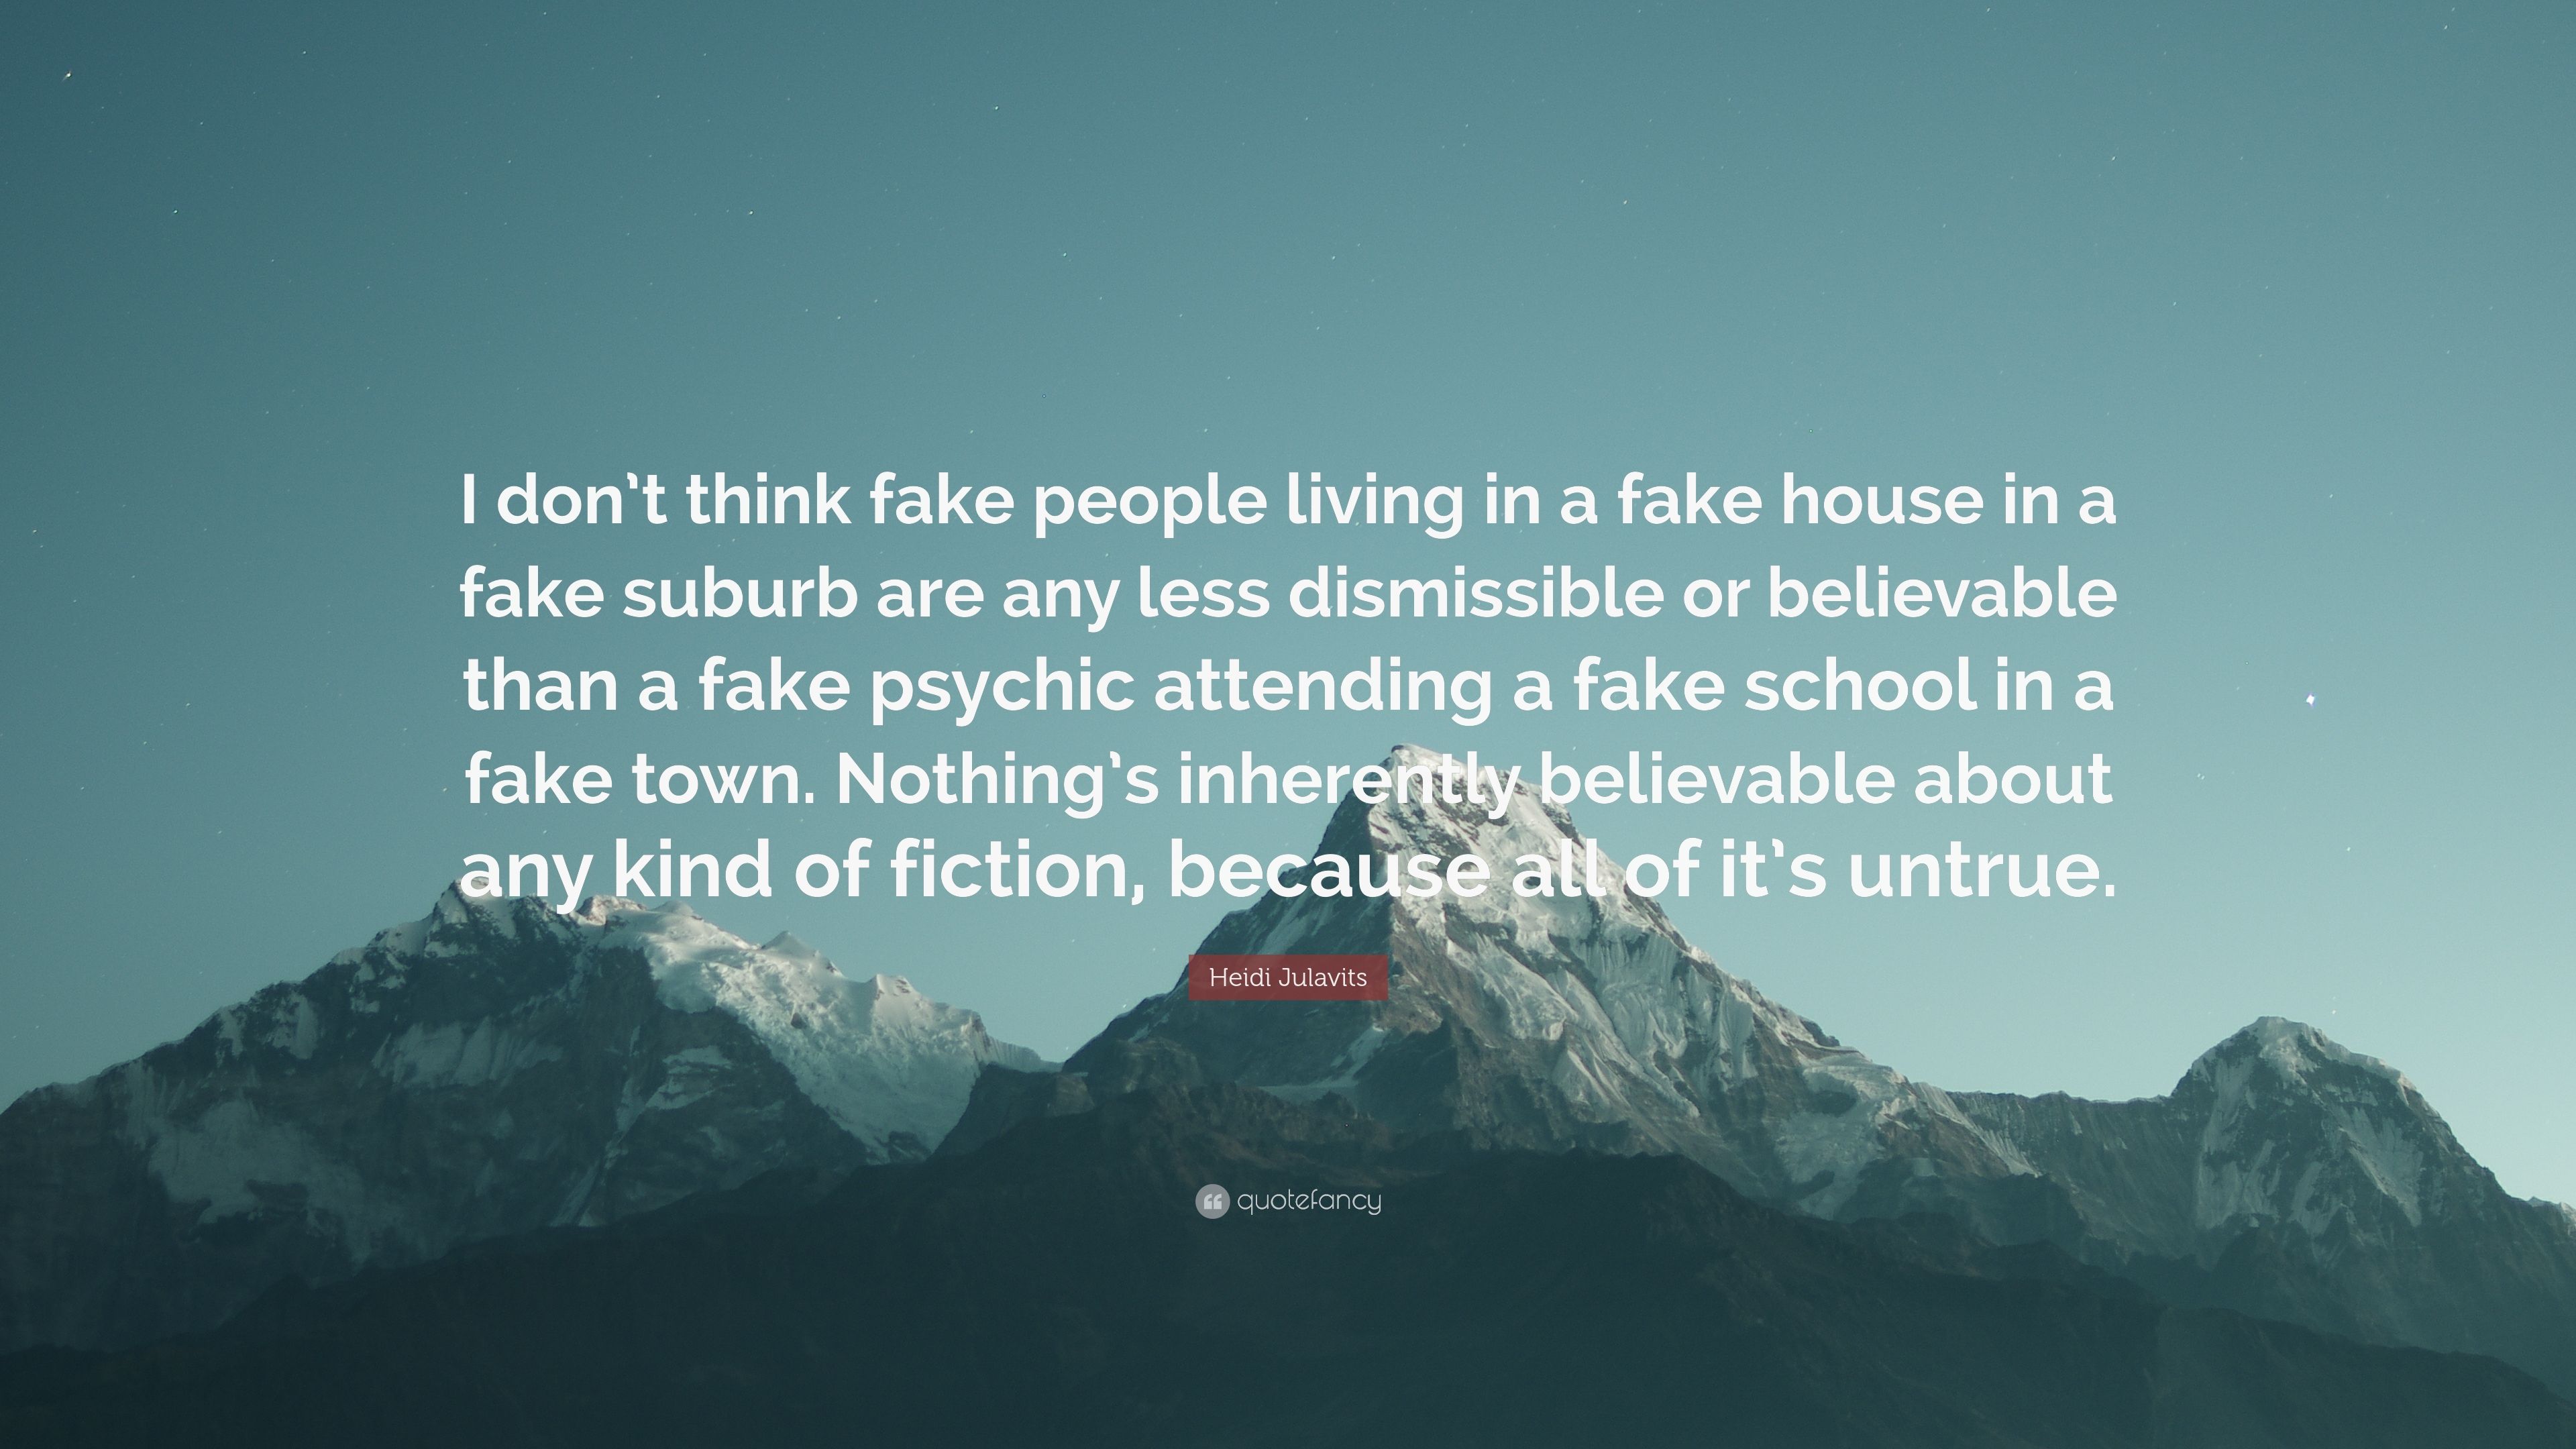 Heidi Julavits Quote: “I don't think fake people living in a fake house in a fake suburb are any less dismissible or believable than a fake psy.” (7 wallpaper)